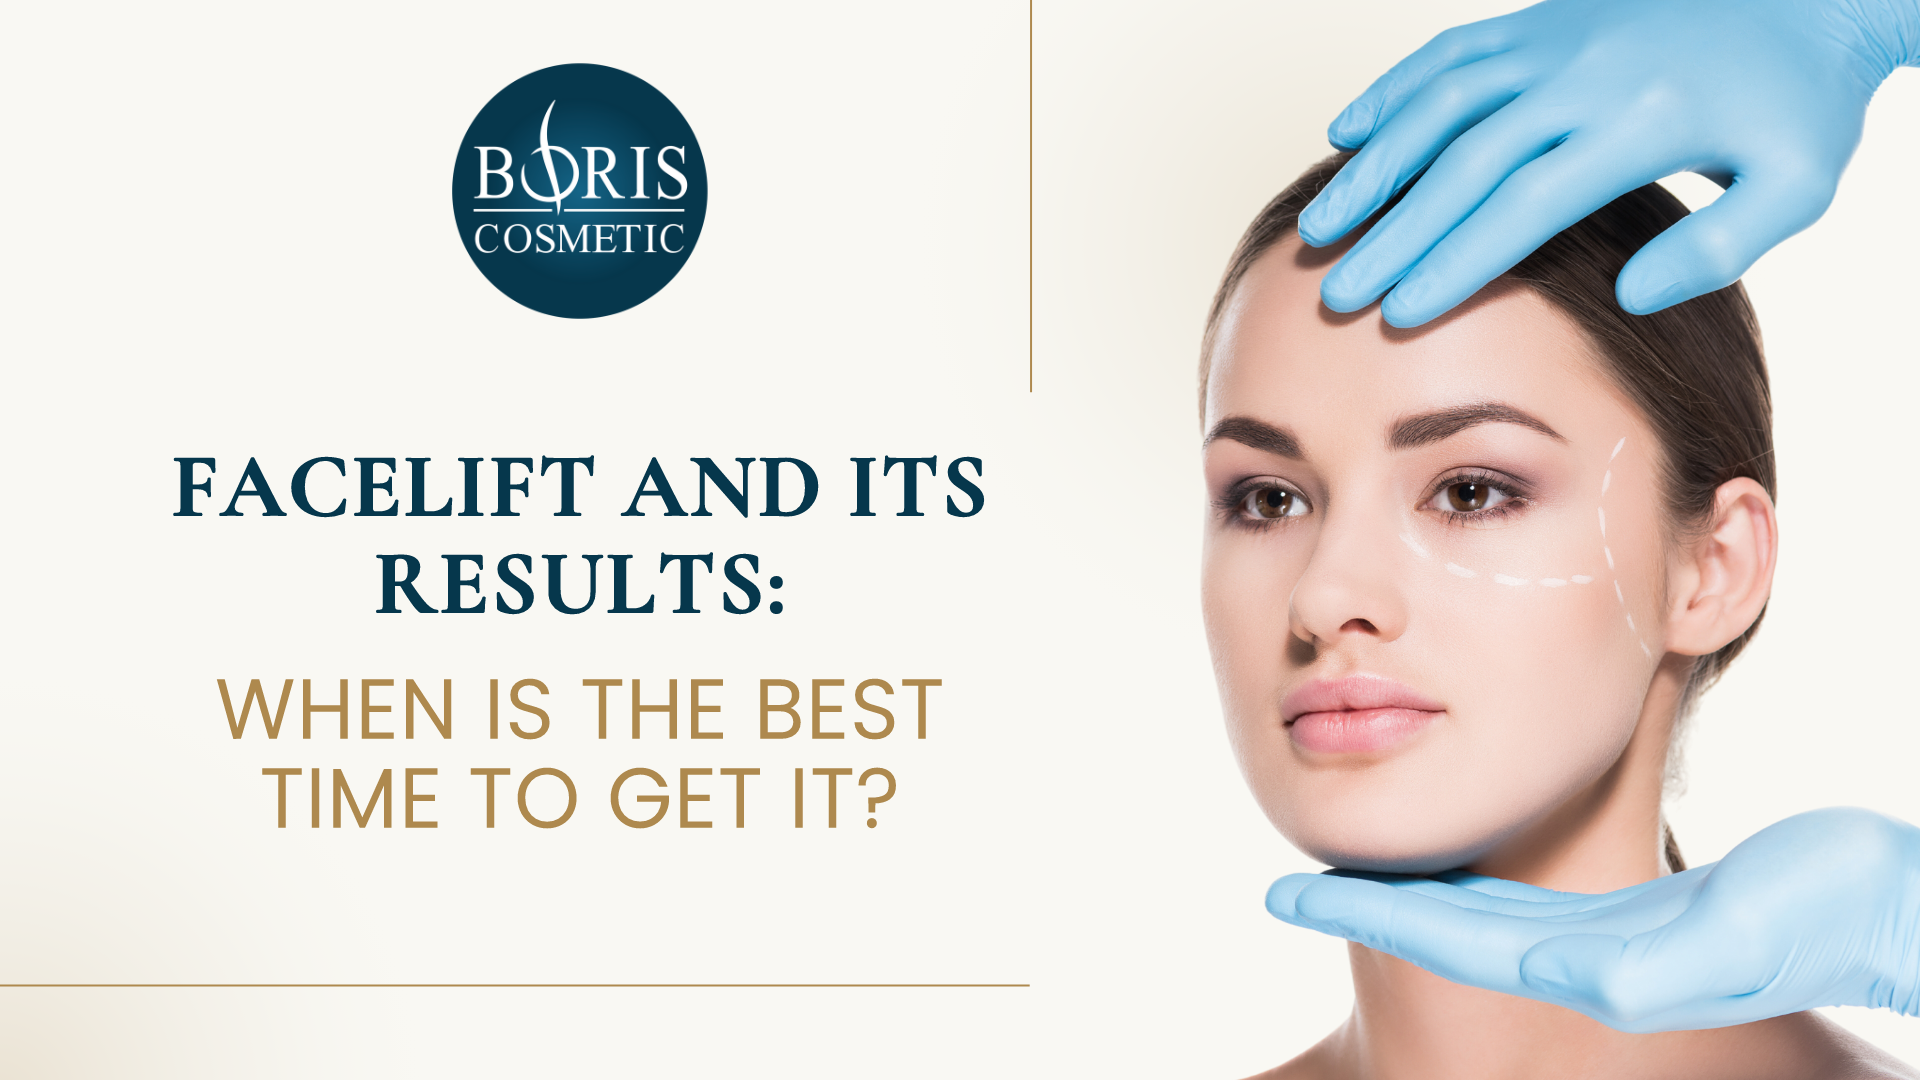 Facelift Results When to Get It Dr. Boris Answers